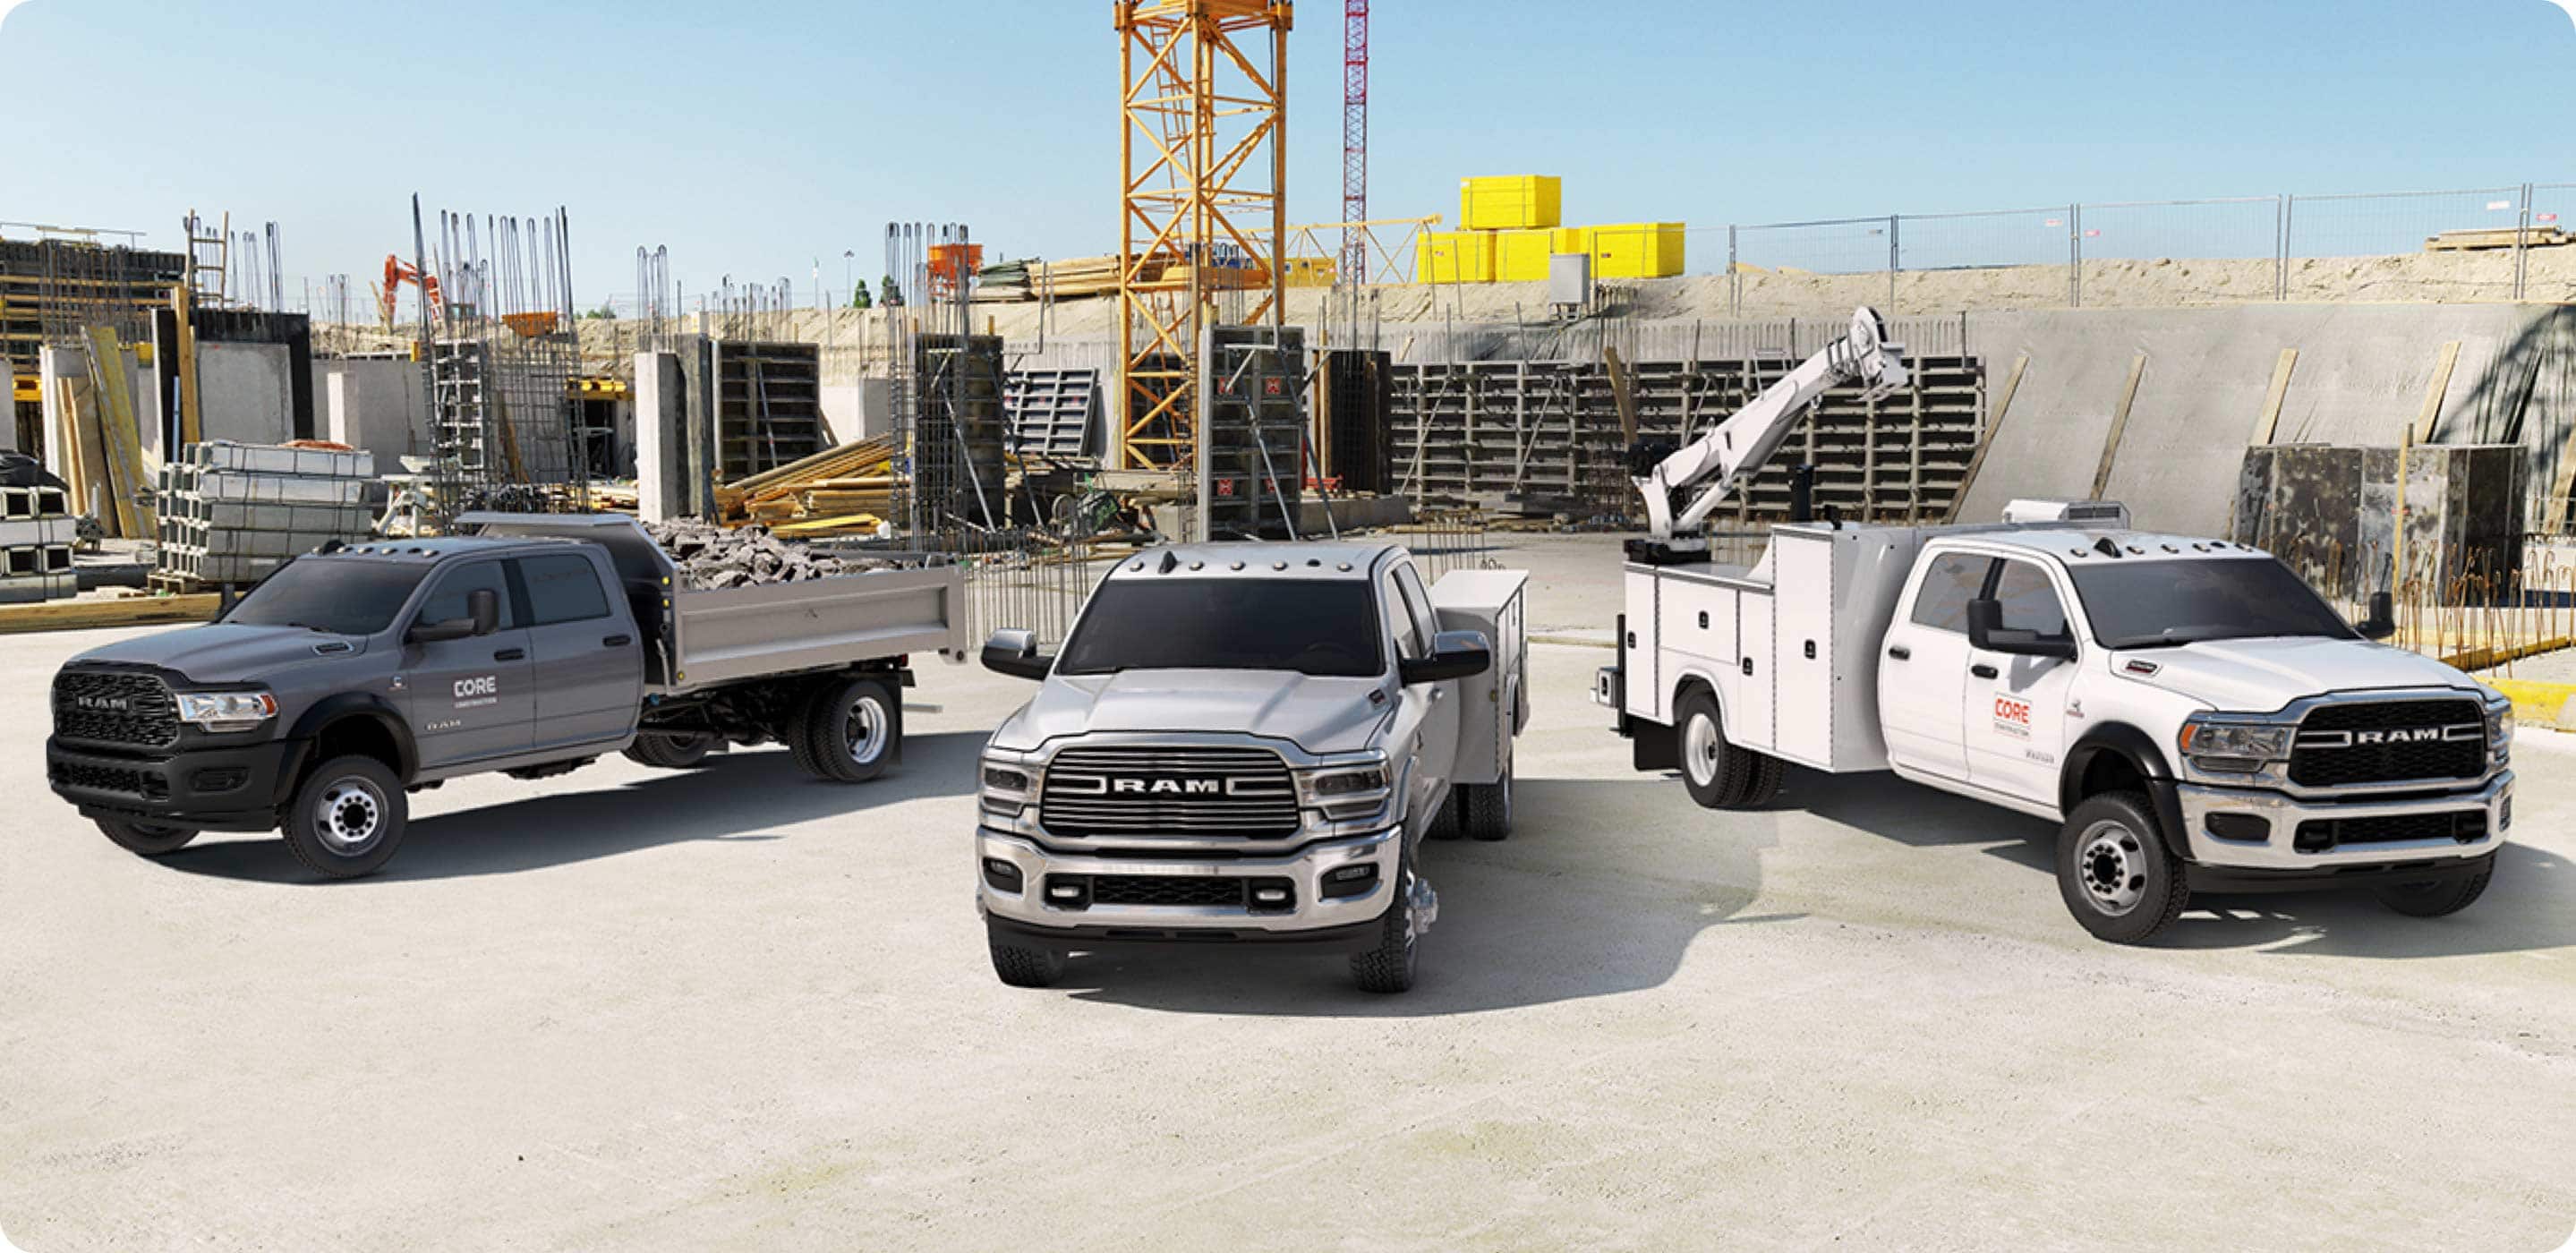 Display Three 2021 Ram Chassis Cab models on a construction site, each with a different upfit.